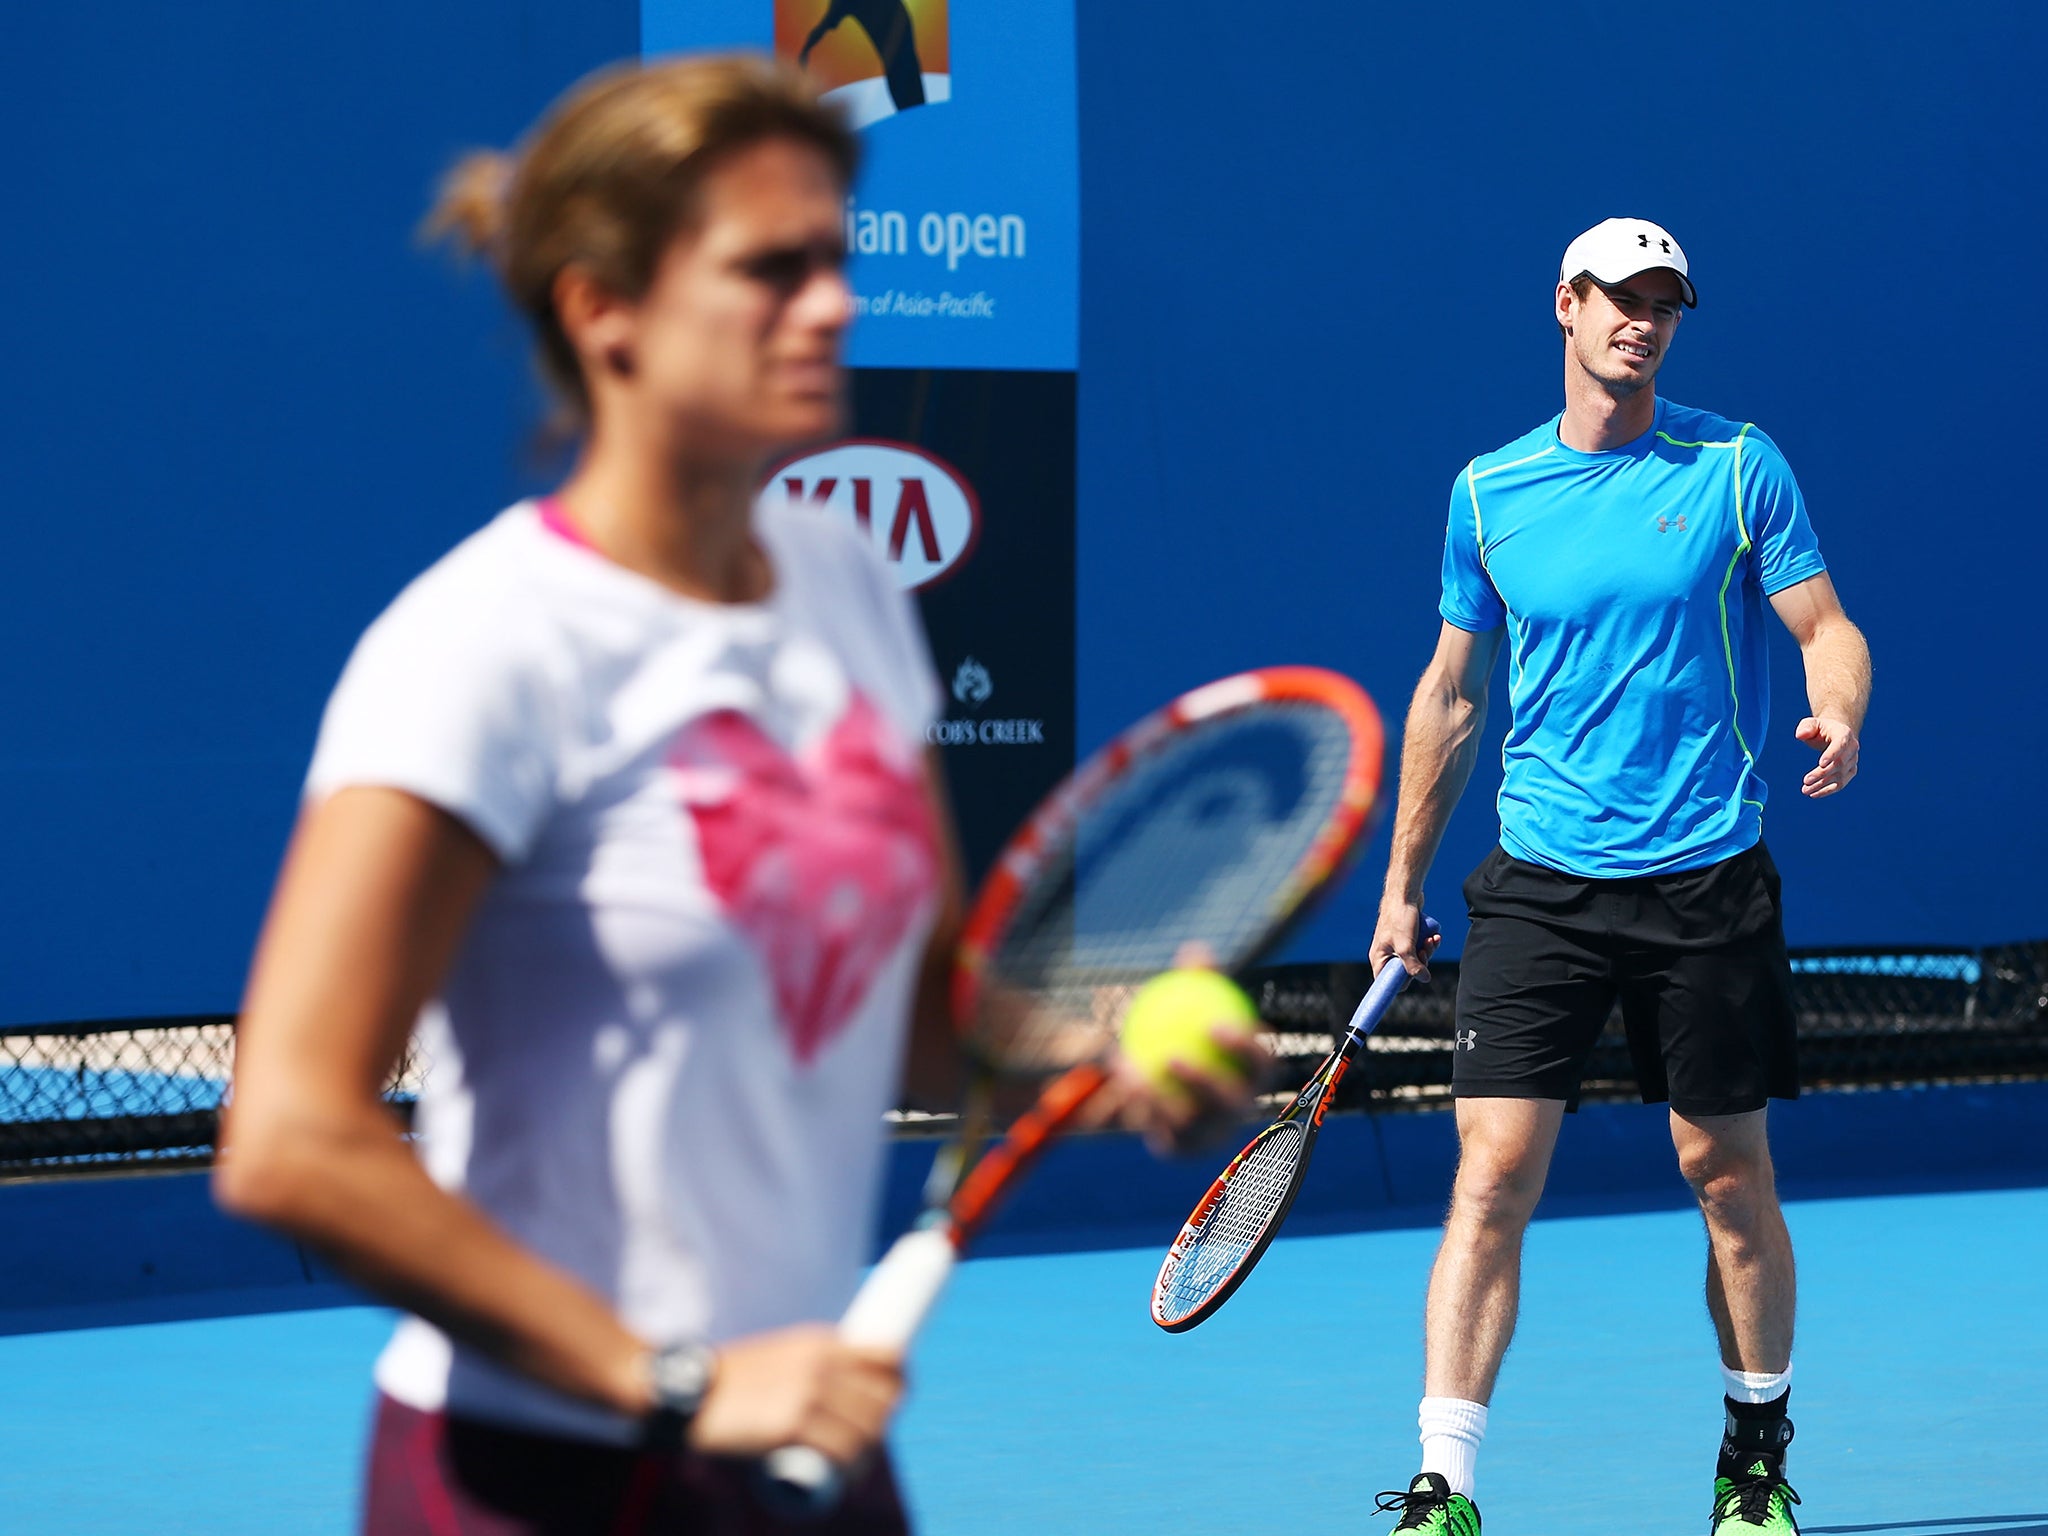 Coach of Andy Murray, Amelie Mauresmo attends a practice session